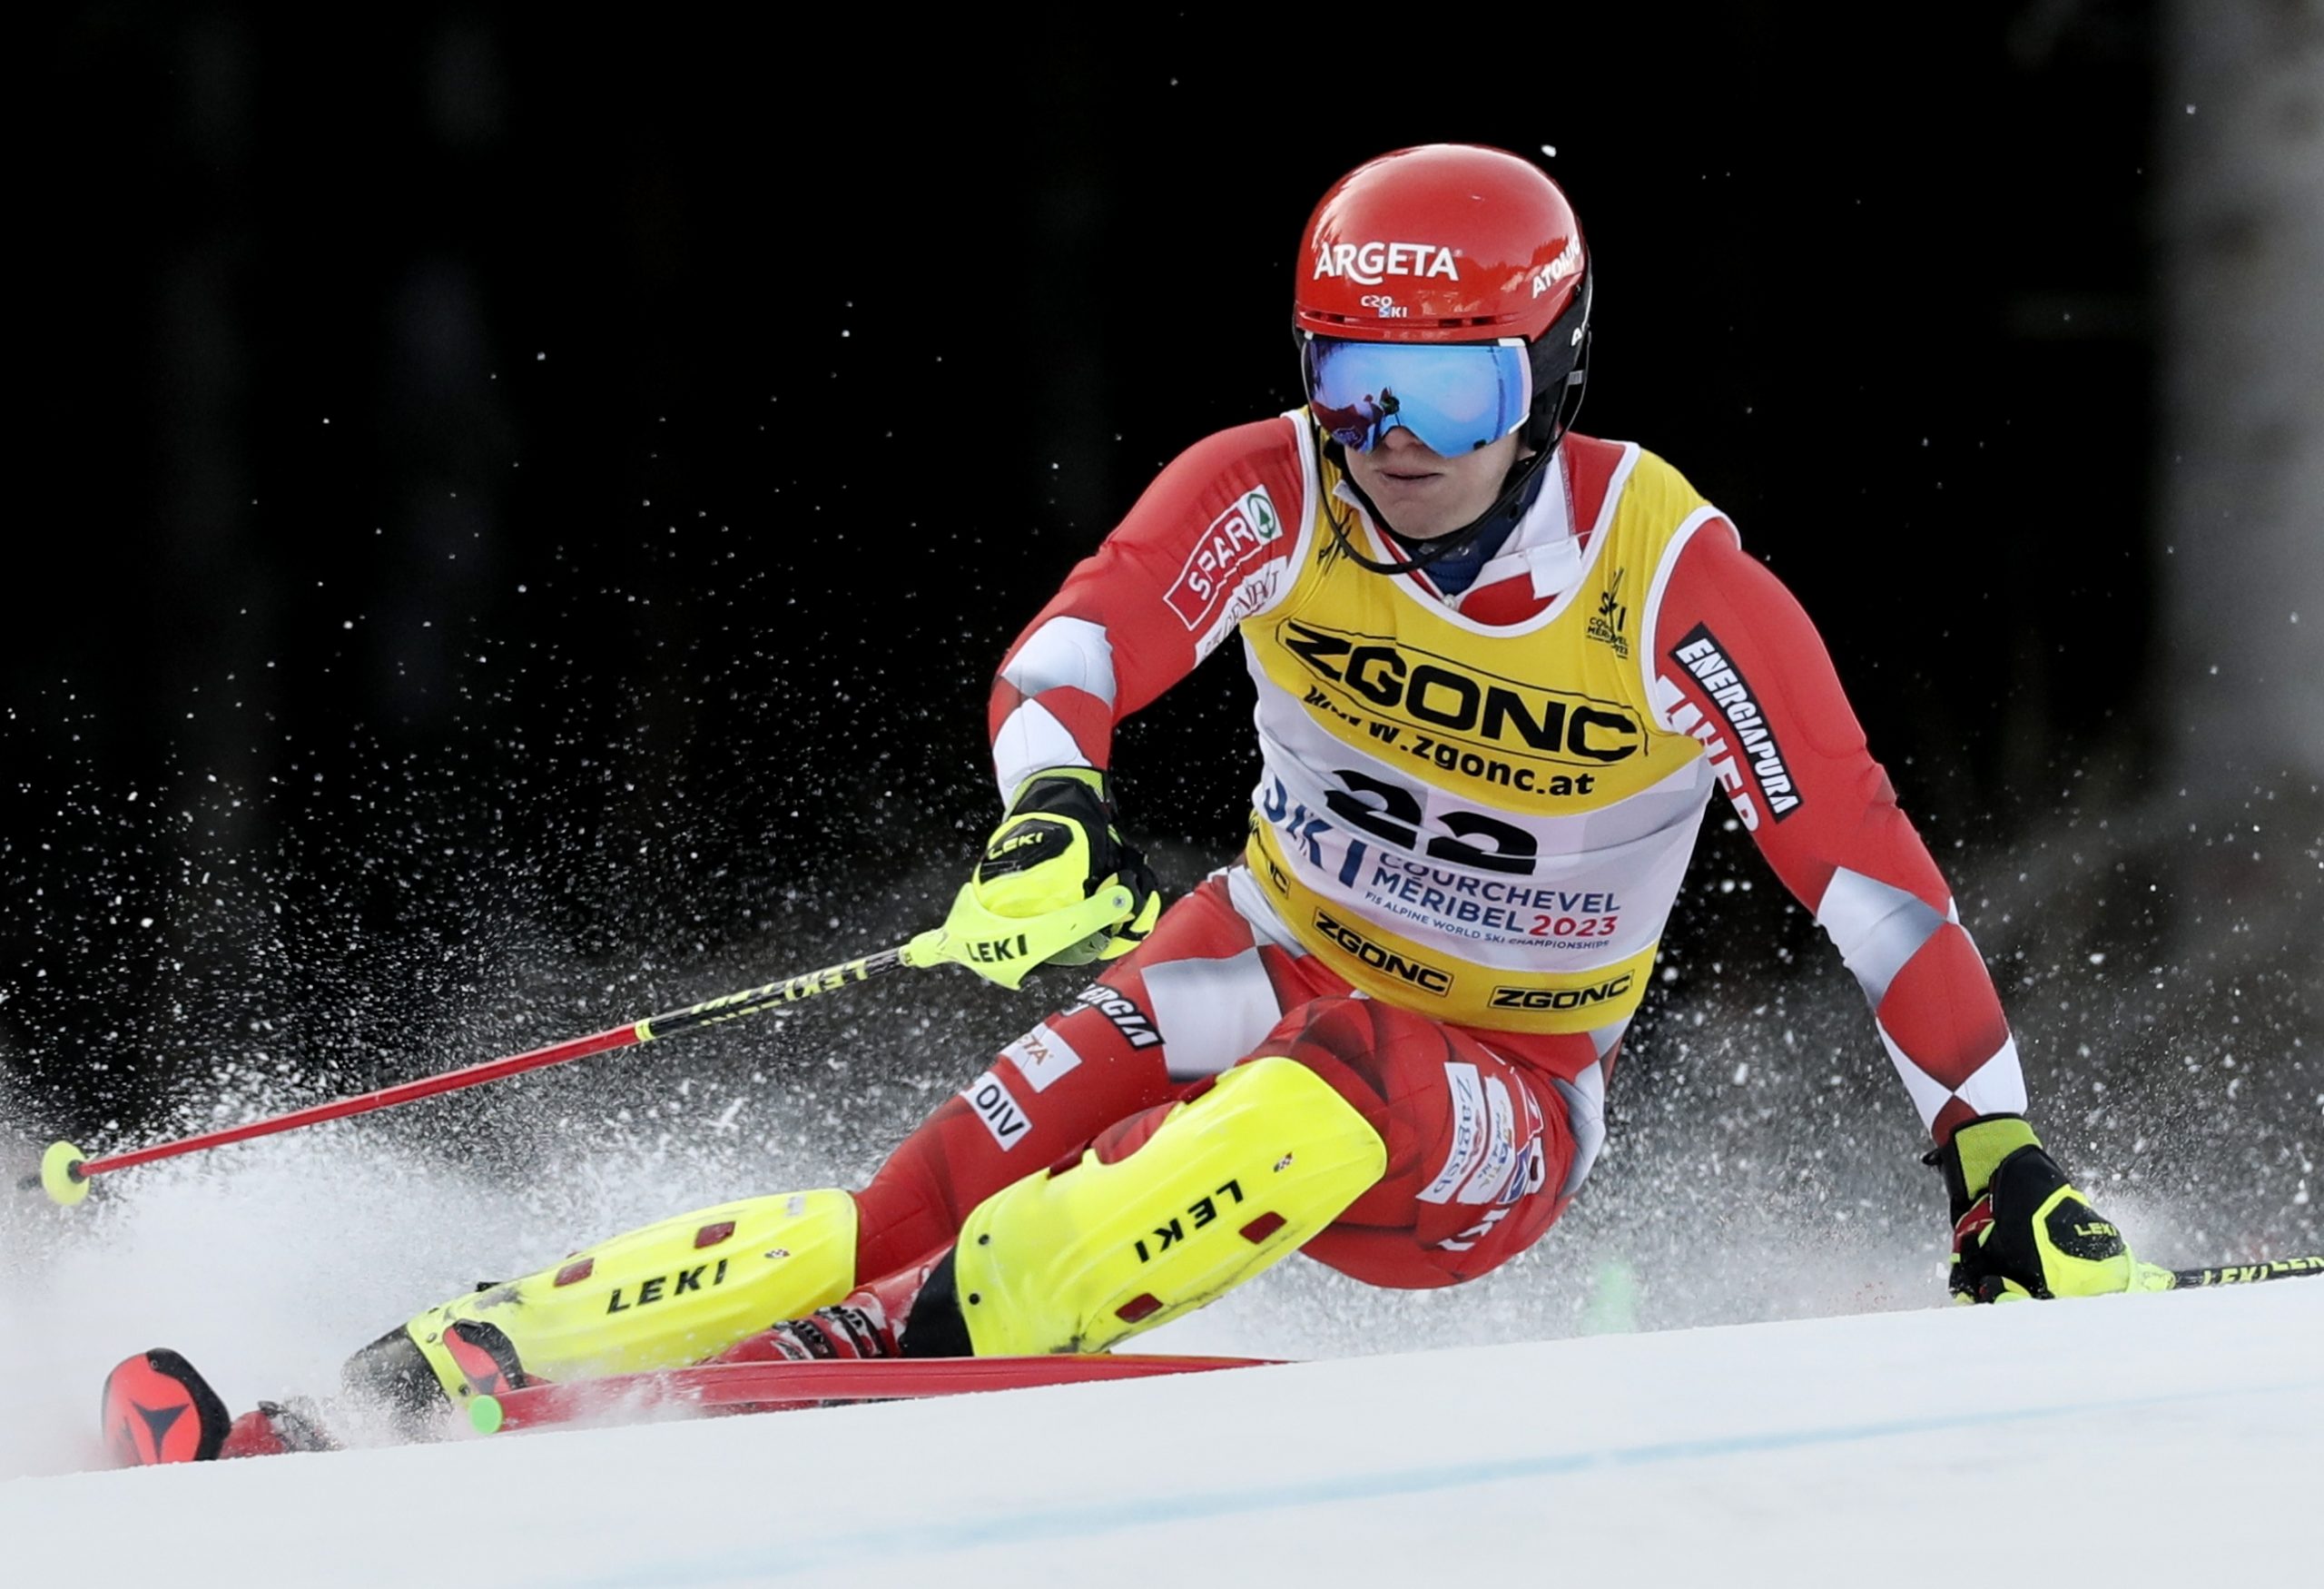 epa10476826 Filip Zubcic of Croatia in action during the 1st run in the Men's Slalom event at the FIS Alpine Skiing World Championships in Courchevel, France, 19 February 2023.  EPA/GUILLAUME HORCAJUELO